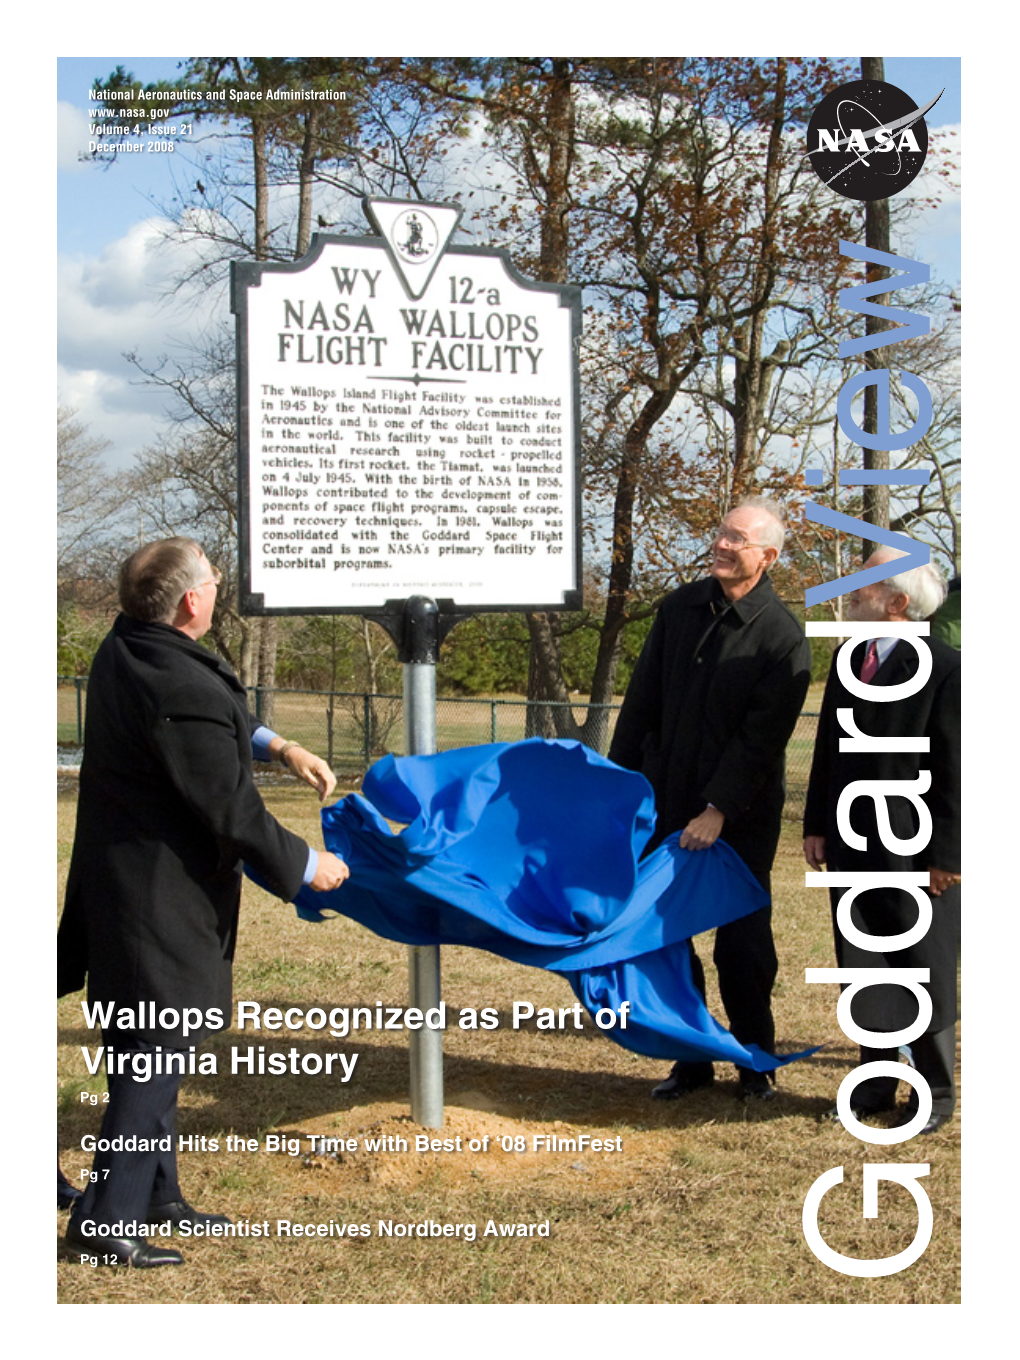 Wallops Recognized As Part of Virginia History Pg 2